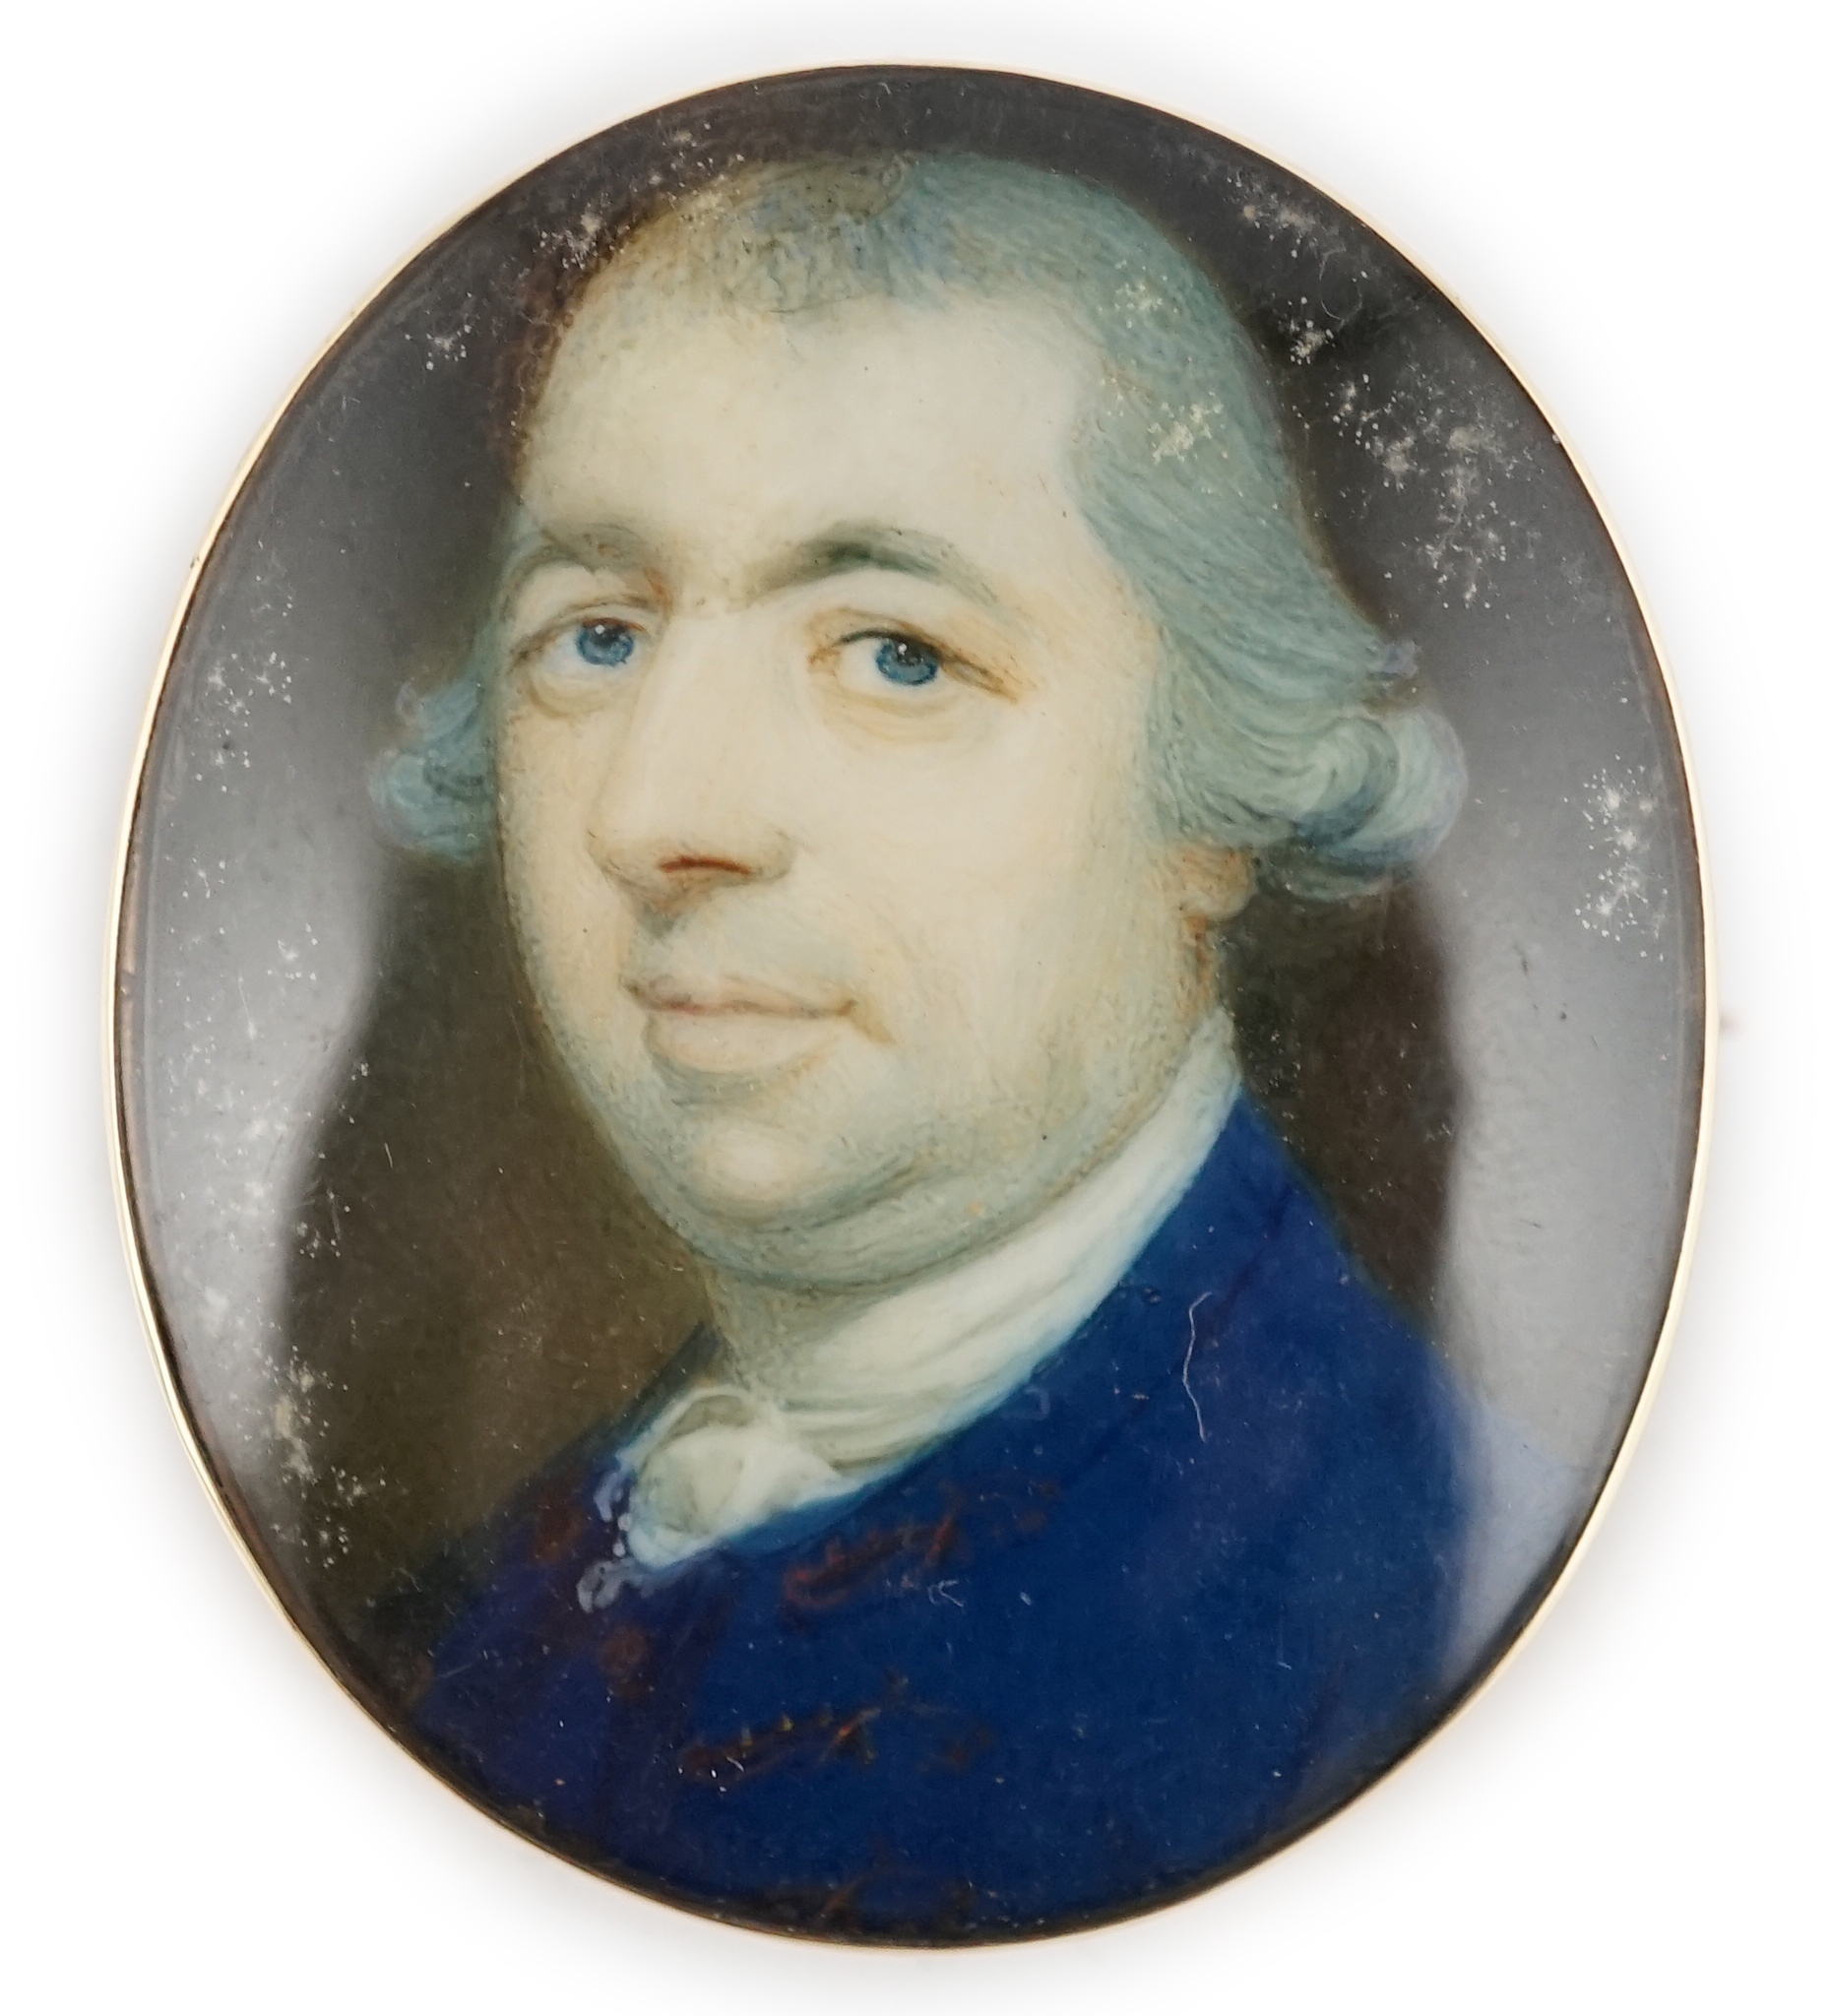 Jeremiah Meyer, R.A. (Anglo-German, 1735-1789), Portrait miniature of a gentleman, oil on ivory, 3.3 x 2.8cm. CITES Submission reference CC8WNJSG